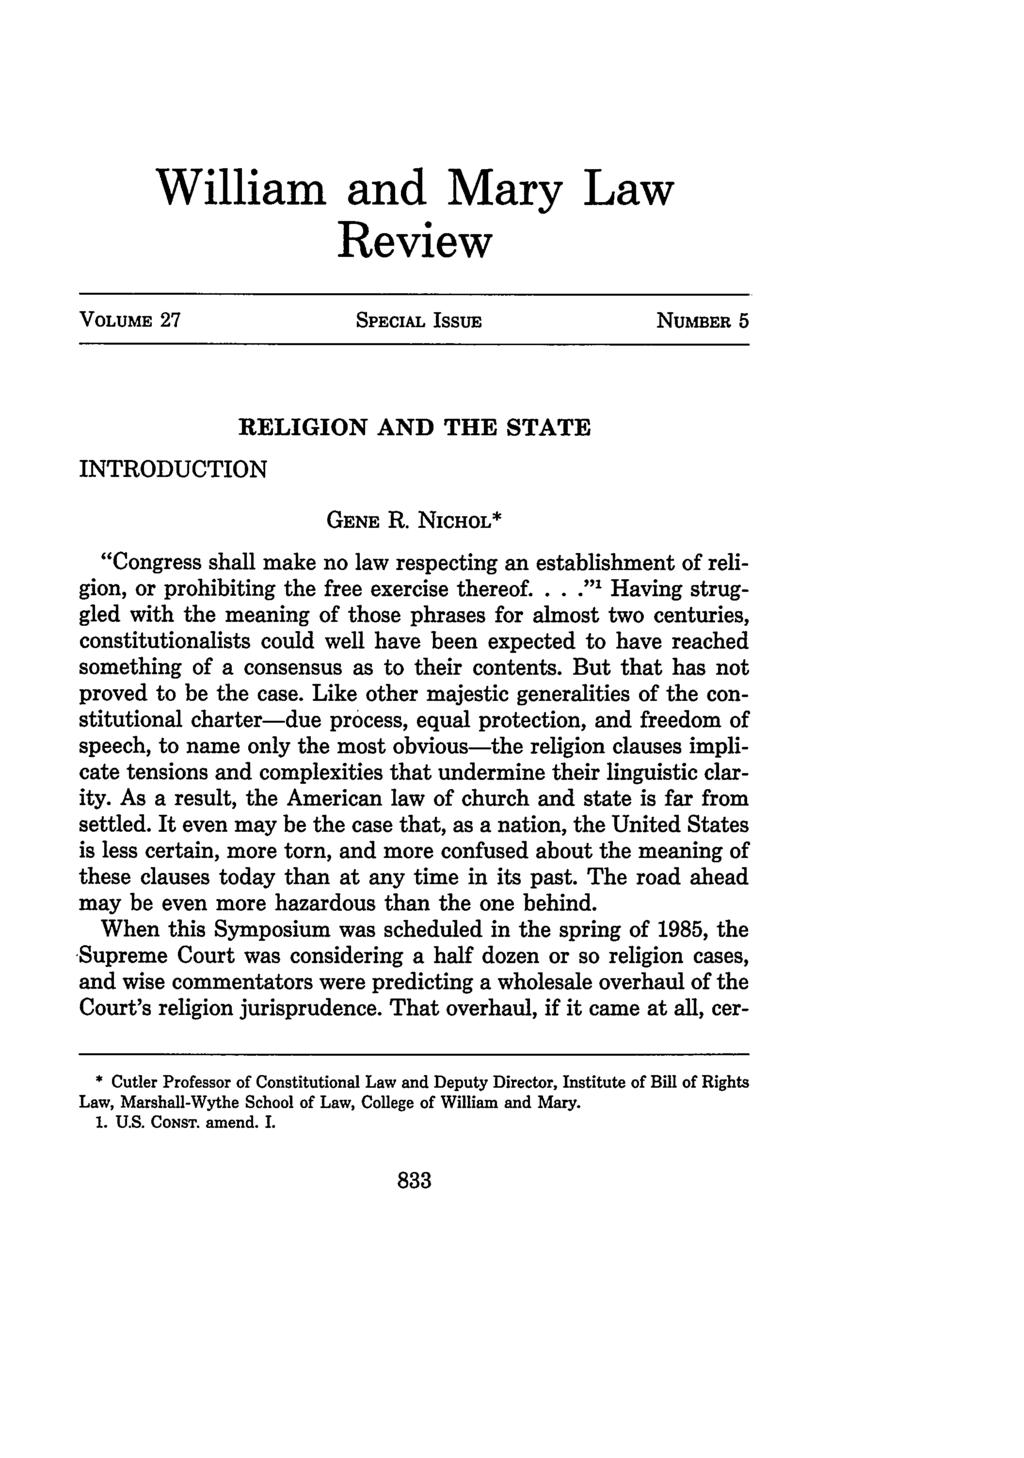 William and Mary Law Review VOLUME 27 SPECIAL ISSUE NUMBER 5 INTRODUCTION RELIGION AND THE STATE GENE R.